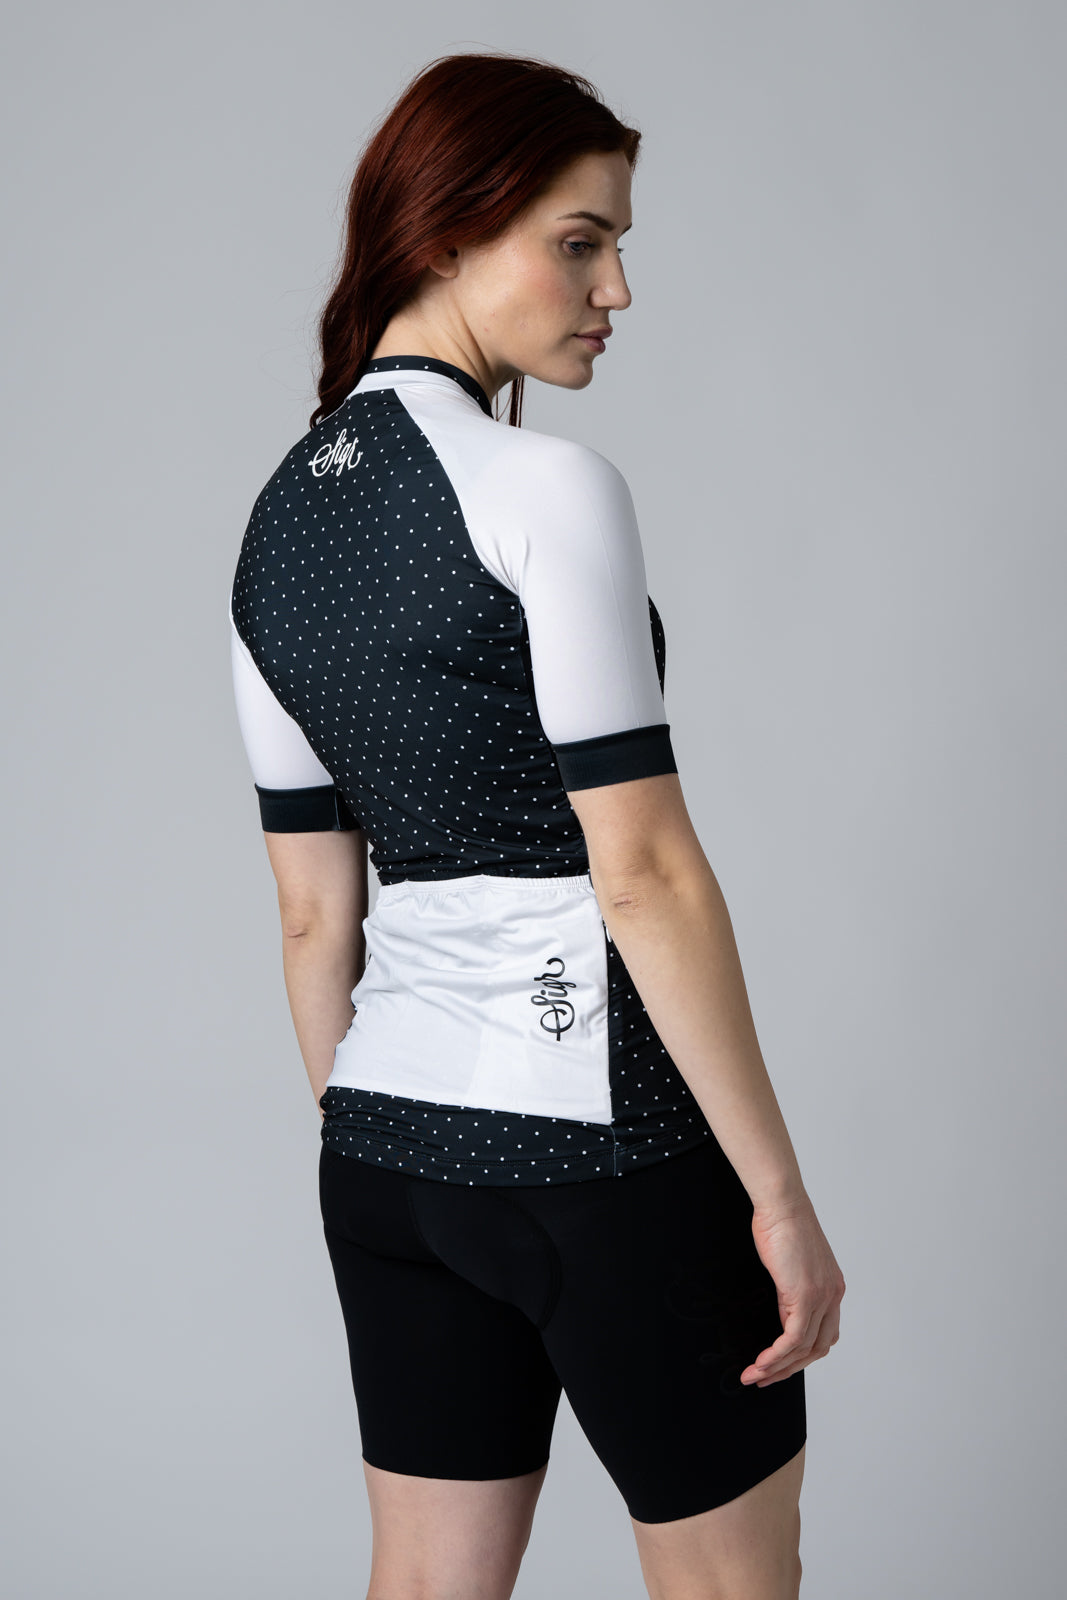 Sigr Black Legacy - Cycling Jersey for Women